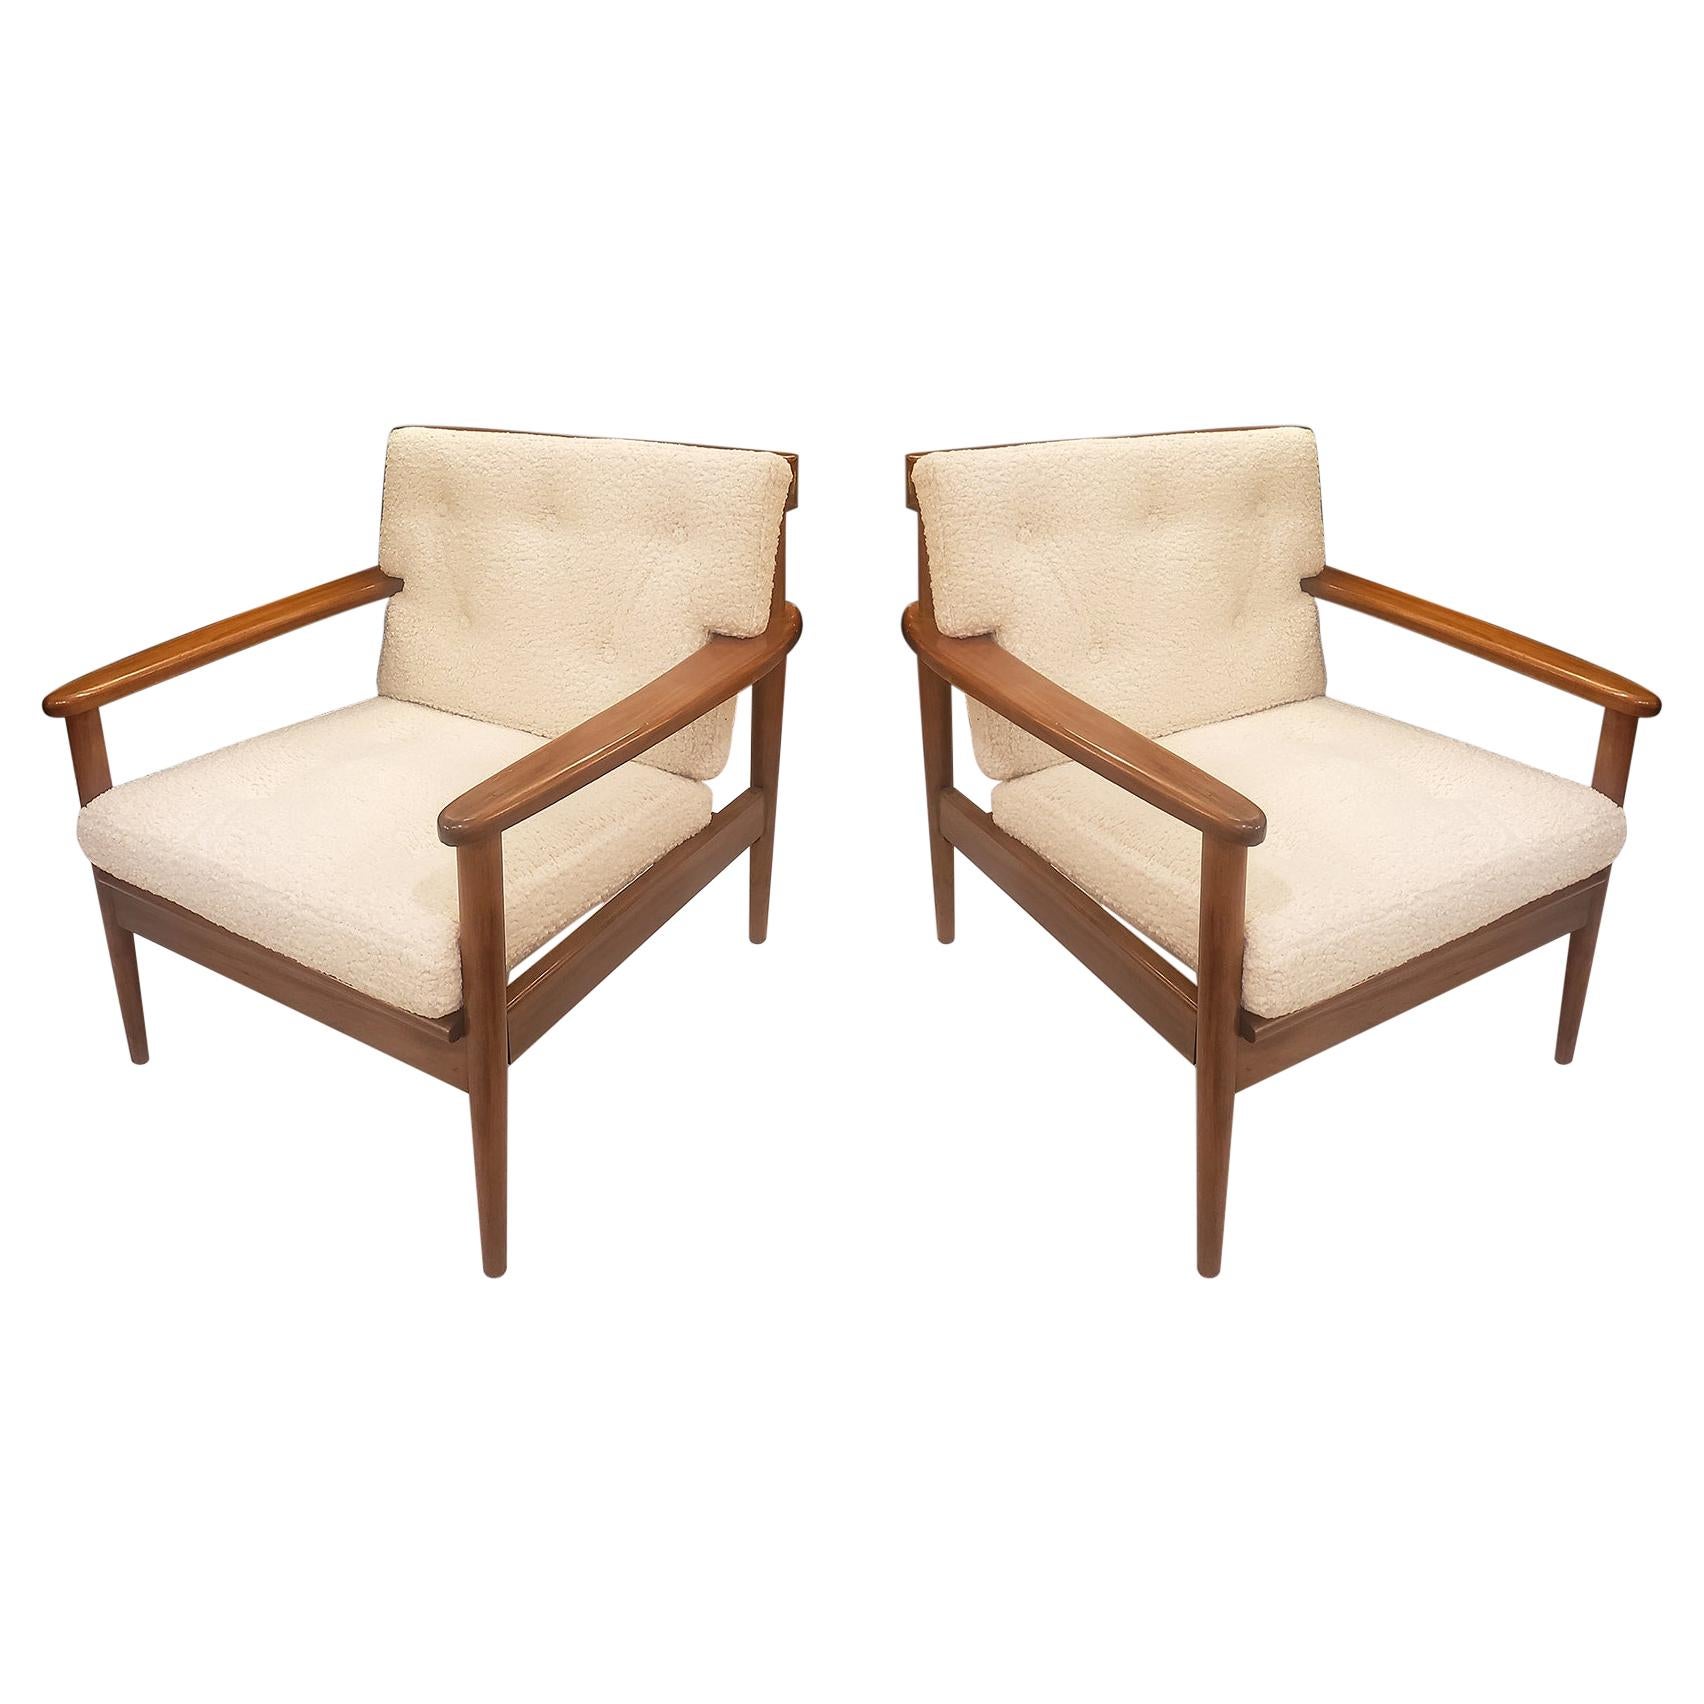 Pair of Scandinavian Mid-Century Lounge Chairs Upholstered in Boucle Fabric For Sale